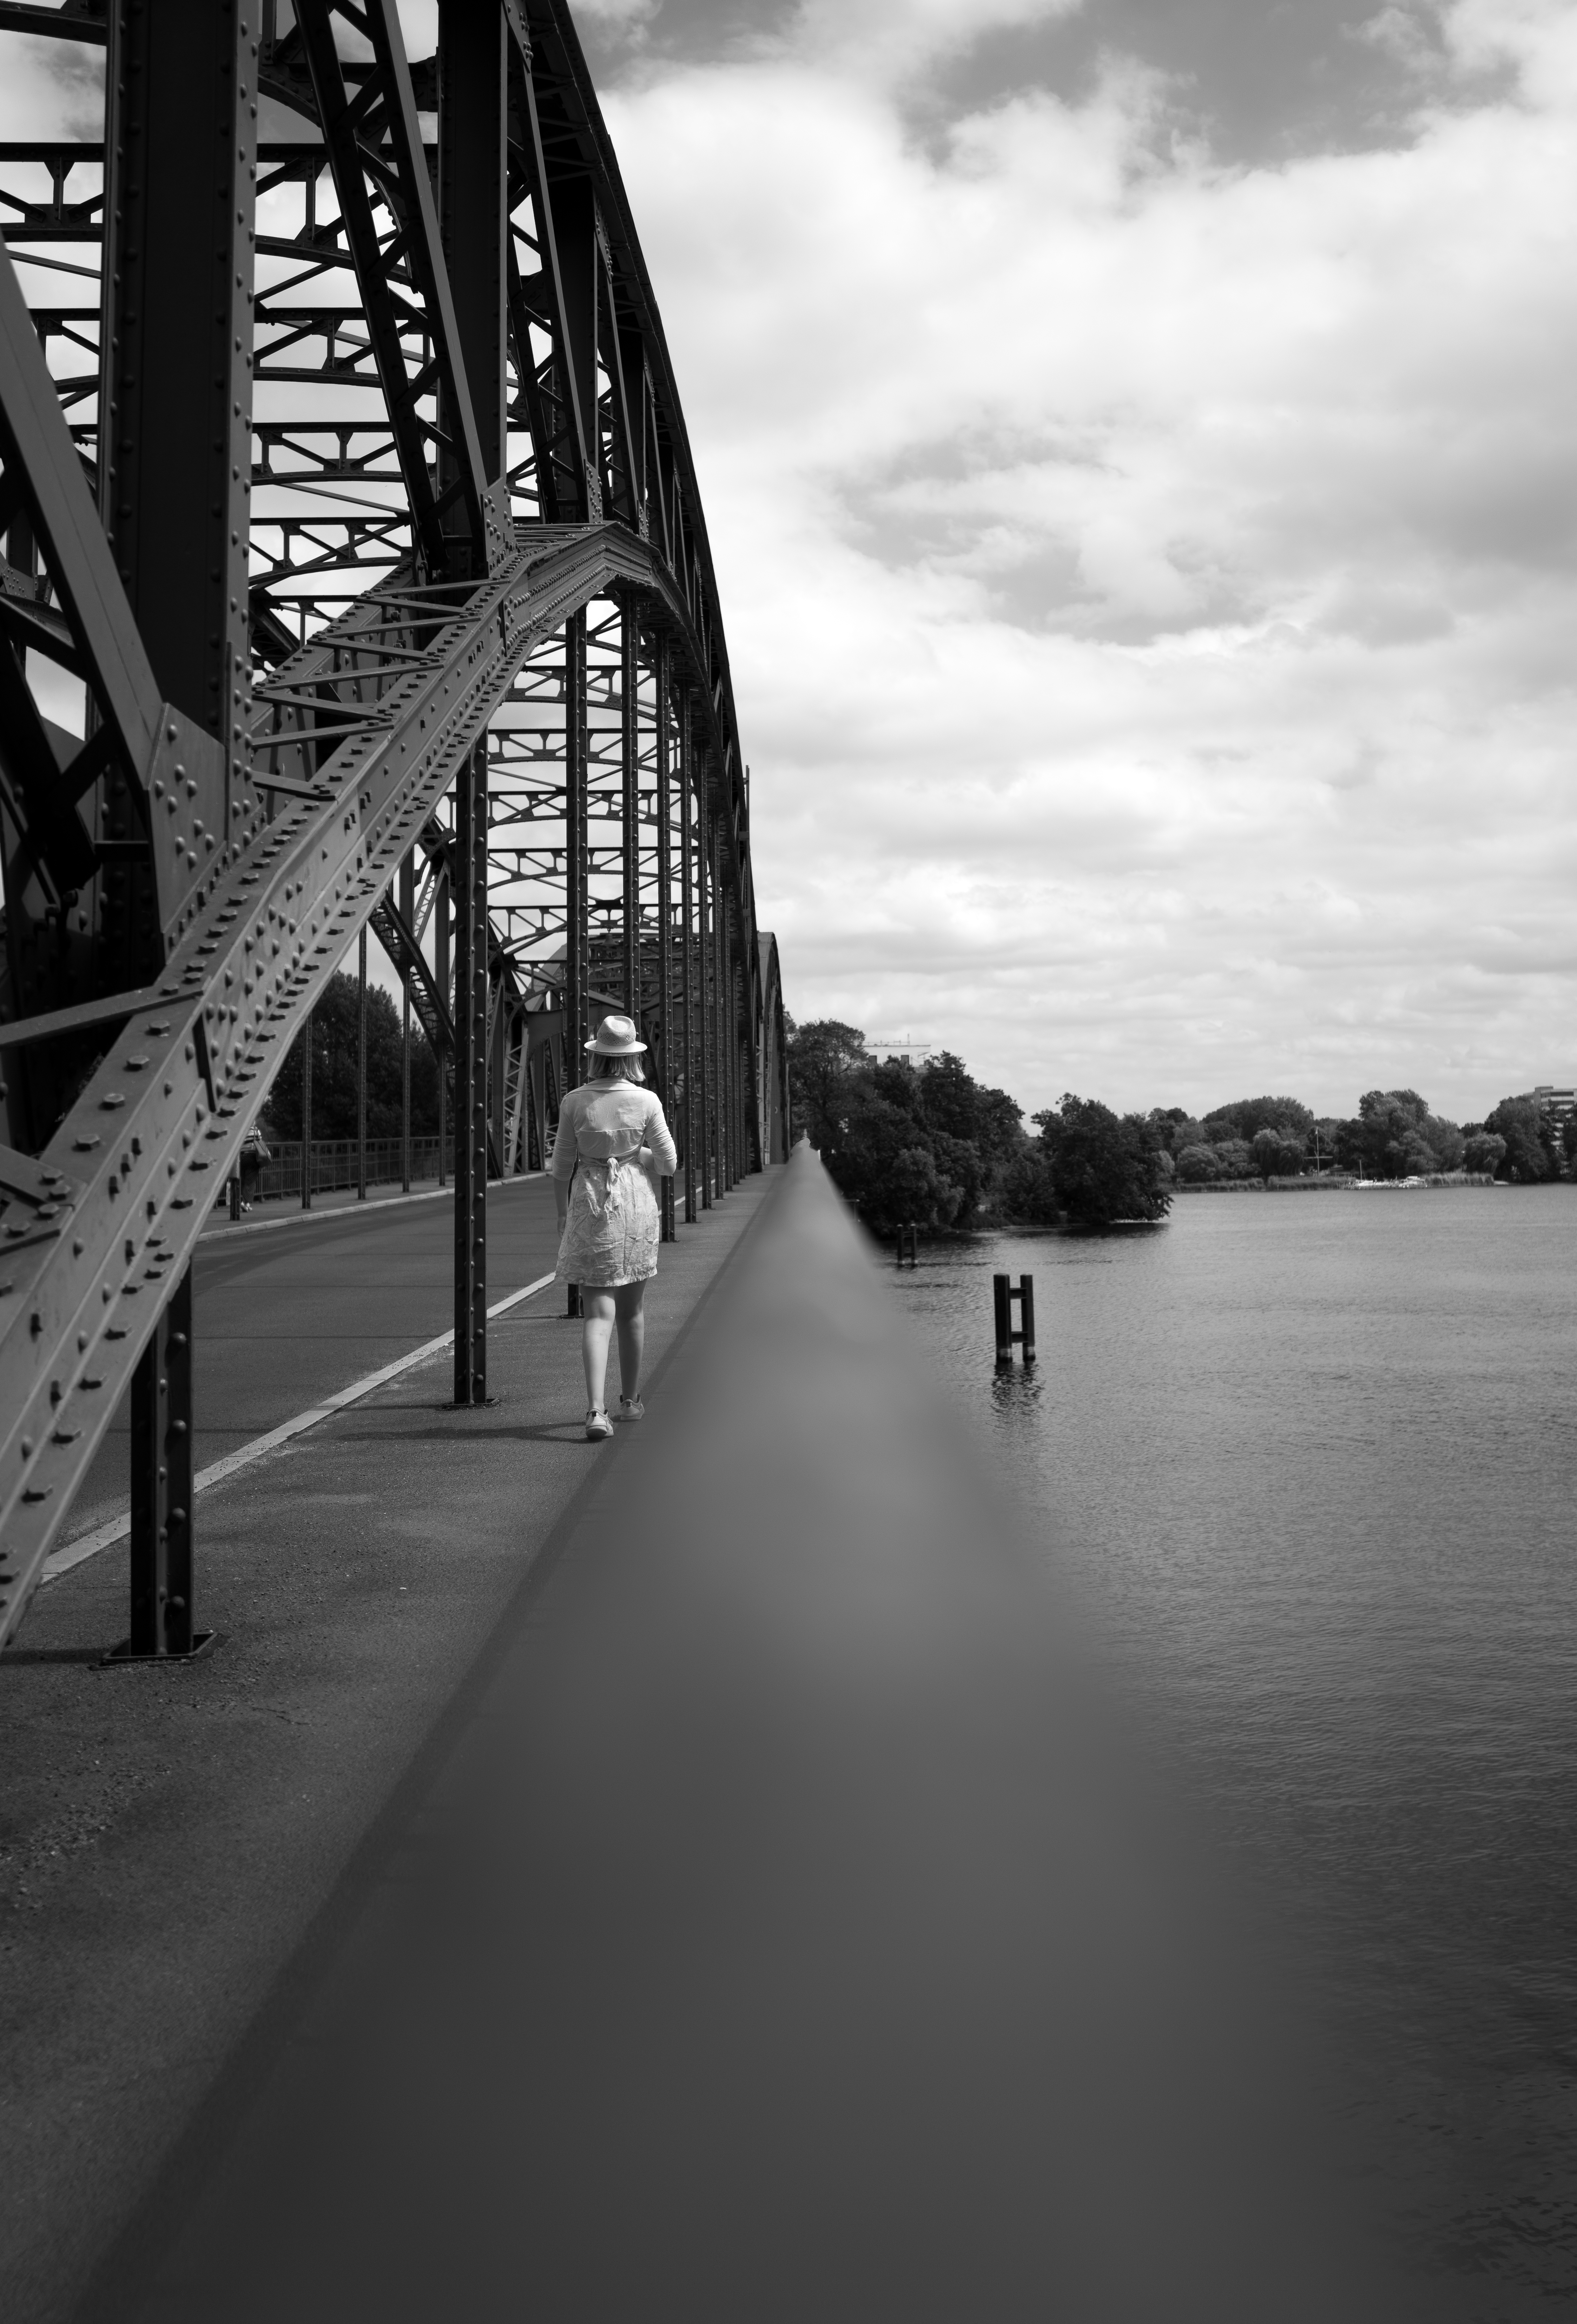 A woman walking down a bridge, the matal construction of the bridge on the left side of the frame balanced by the nature and sky on the right.